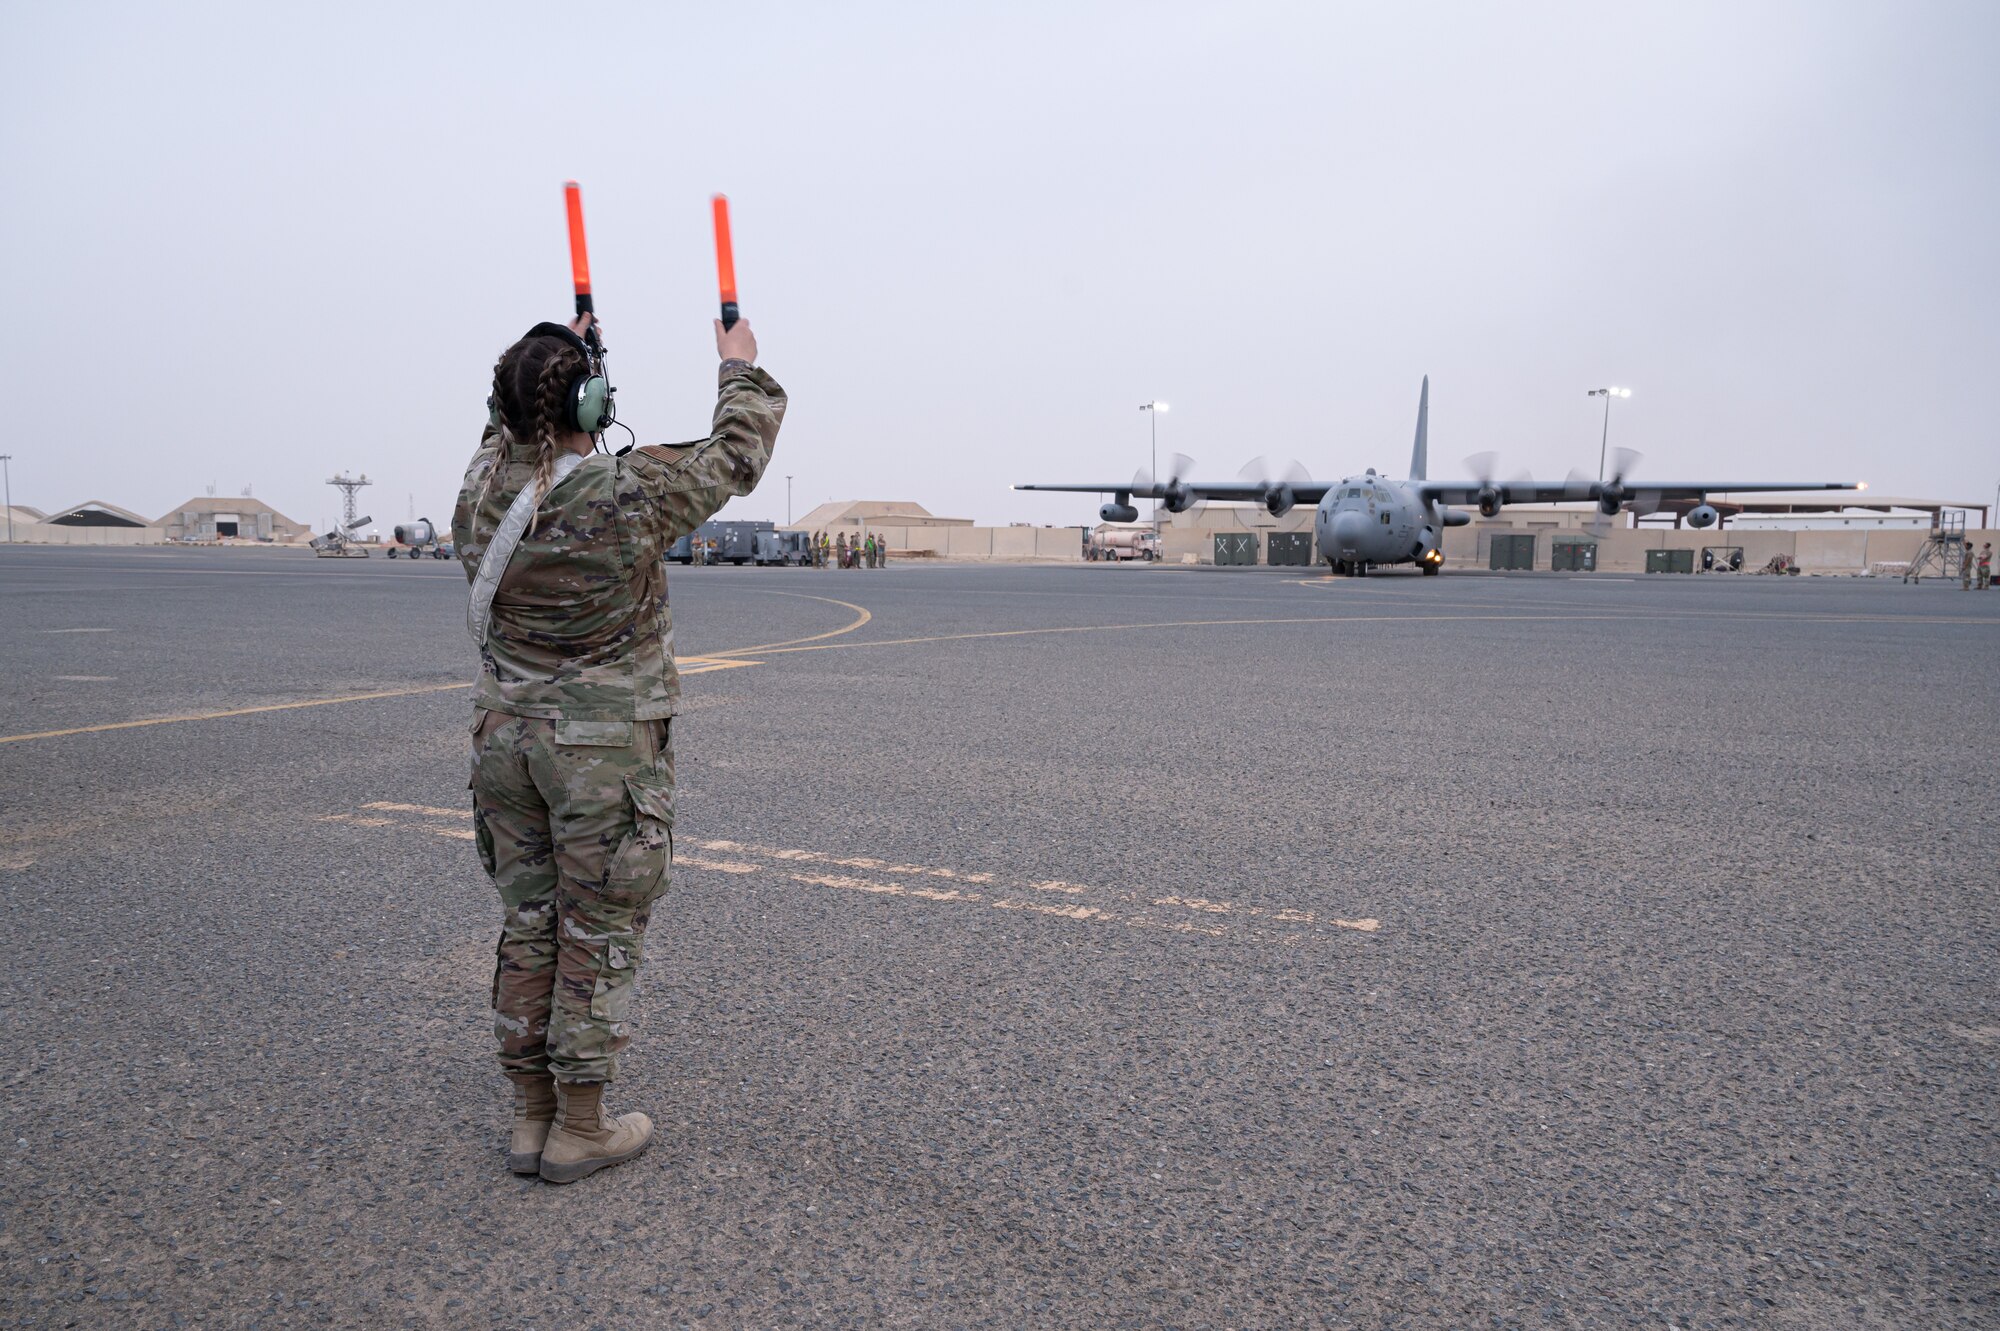 The women of the 41st Expeditionary Electronic Combat Squadron assembled an air crew on base and flew together in support of International Women’s Day, March 8, 2022.  The 7-member air crew flew an electronic warfare mission supporting the CENTCOM area of responsibility and Operation Inherent Resolve to set an example for the future of women in the Air Force and for those who desire a career in aviation.